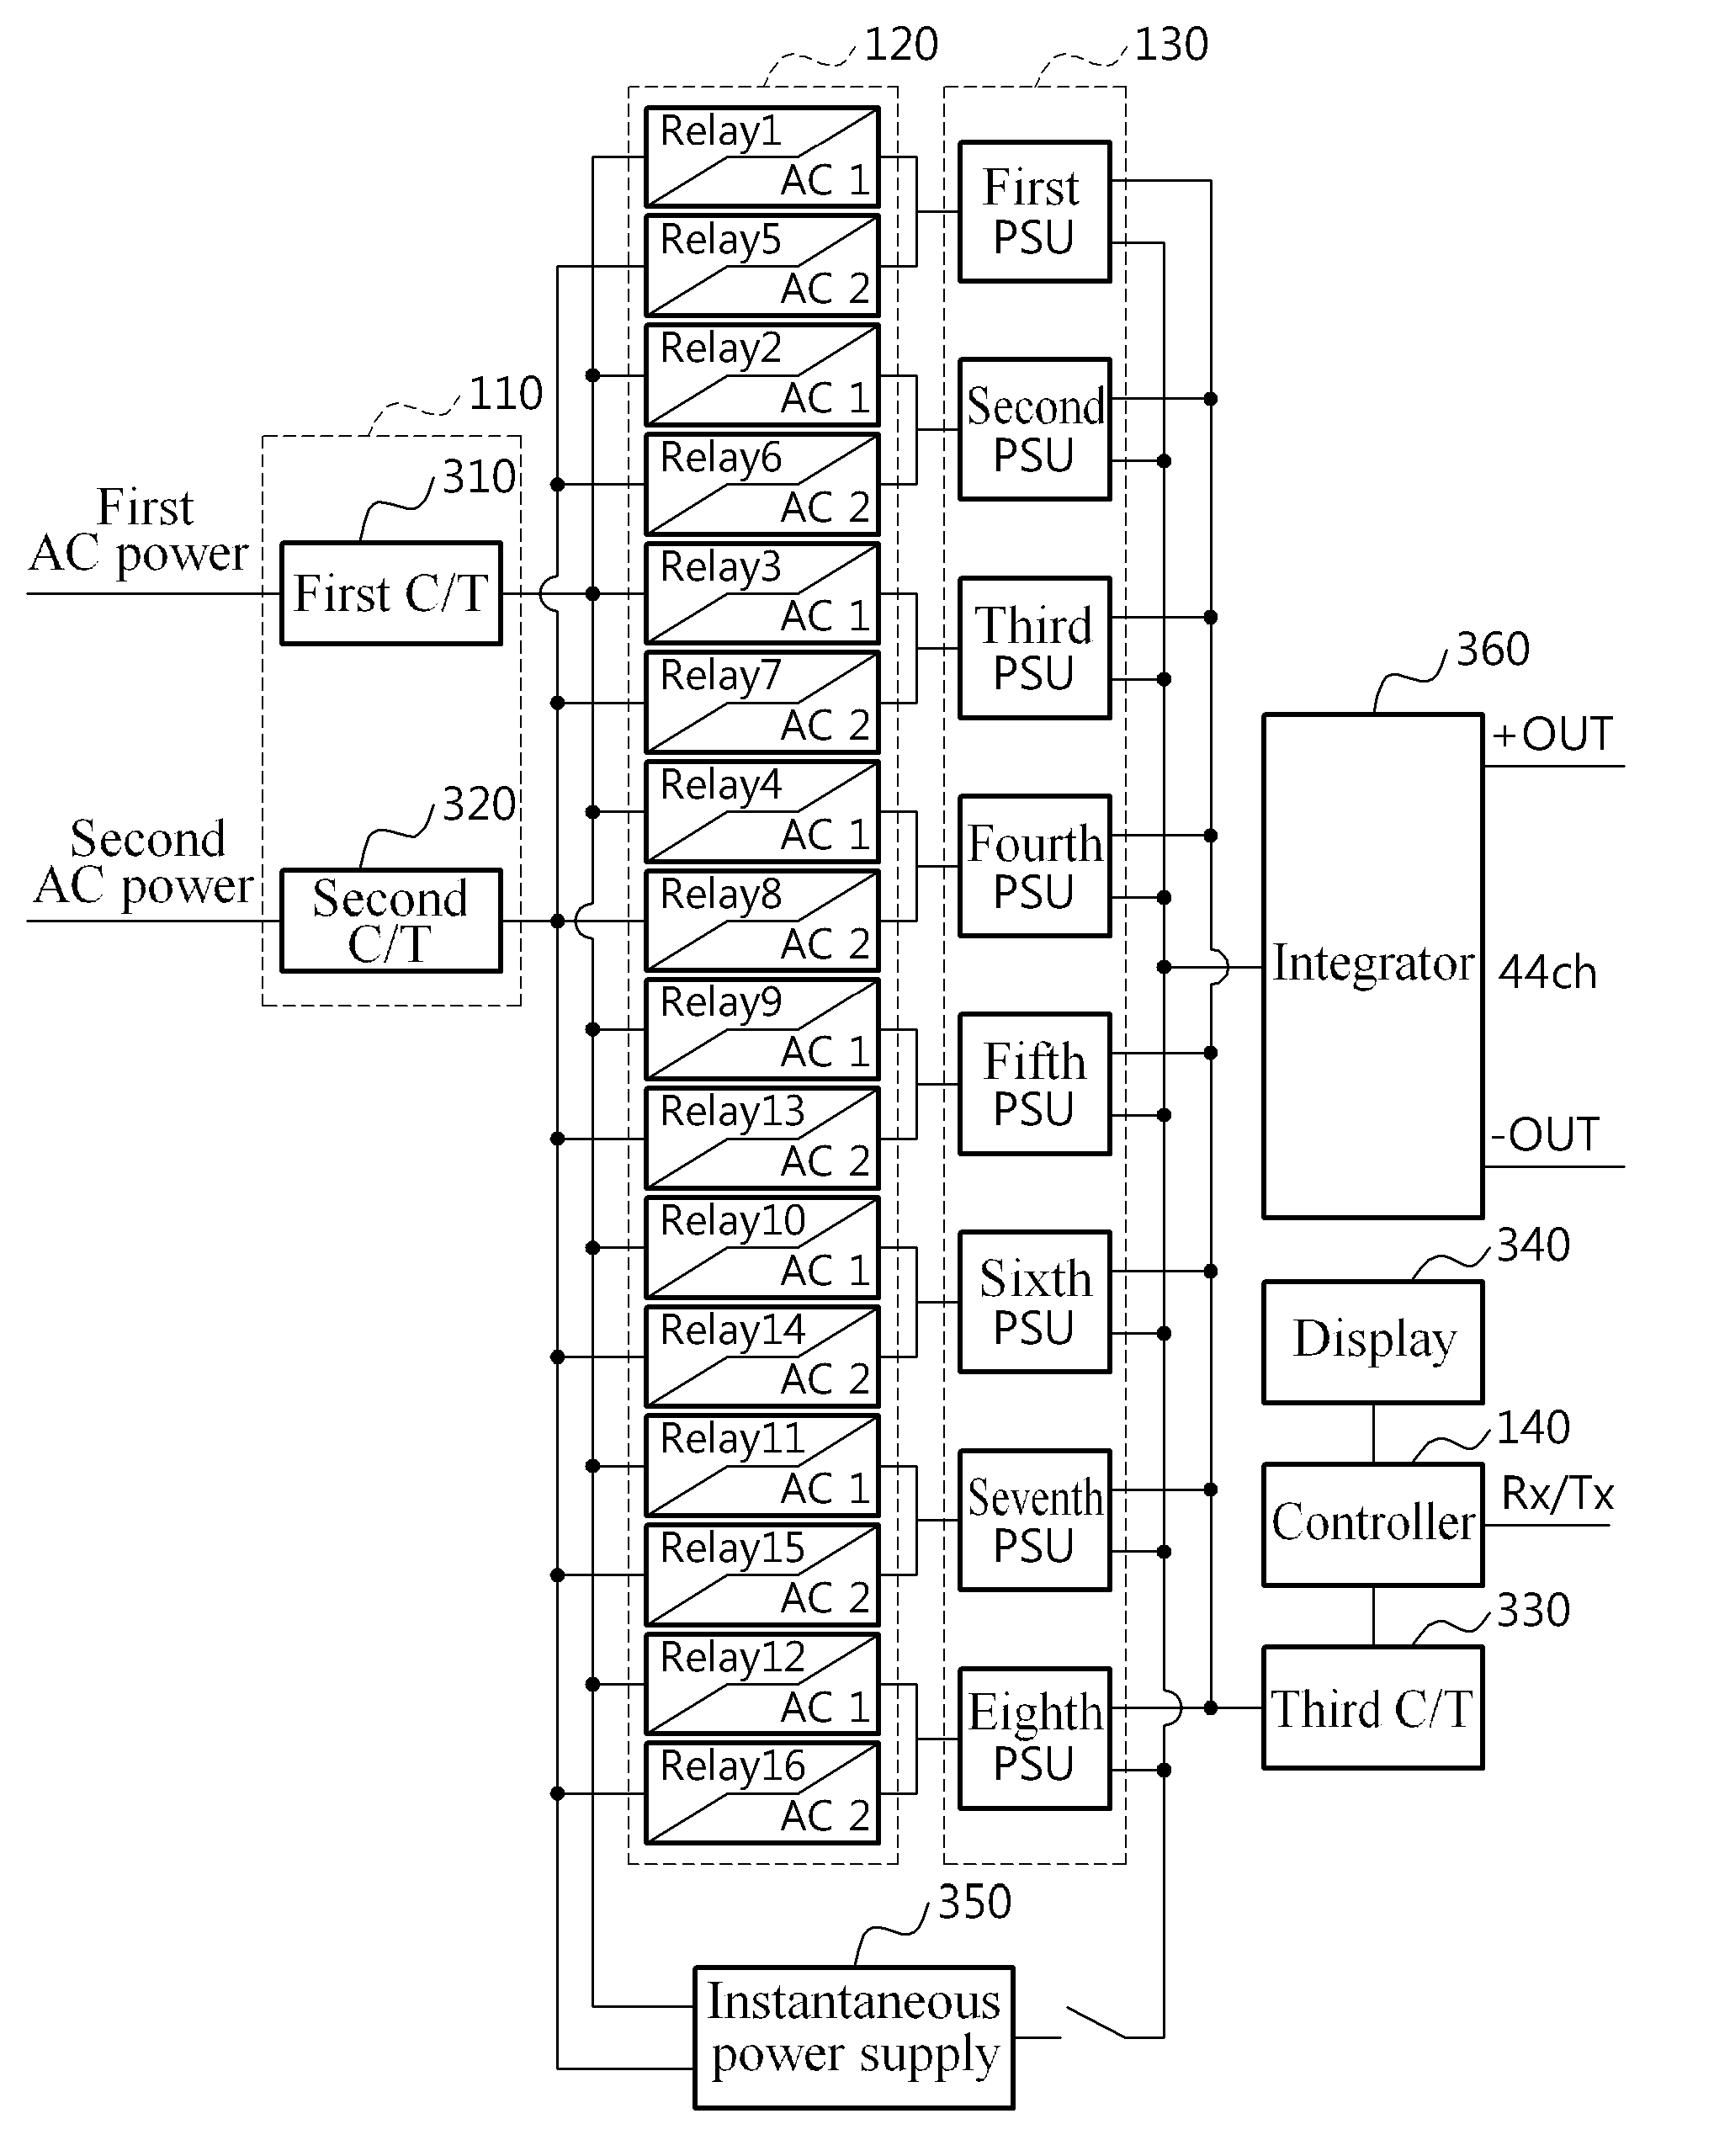 Highly efficient power supply unit and method for supplying power using same